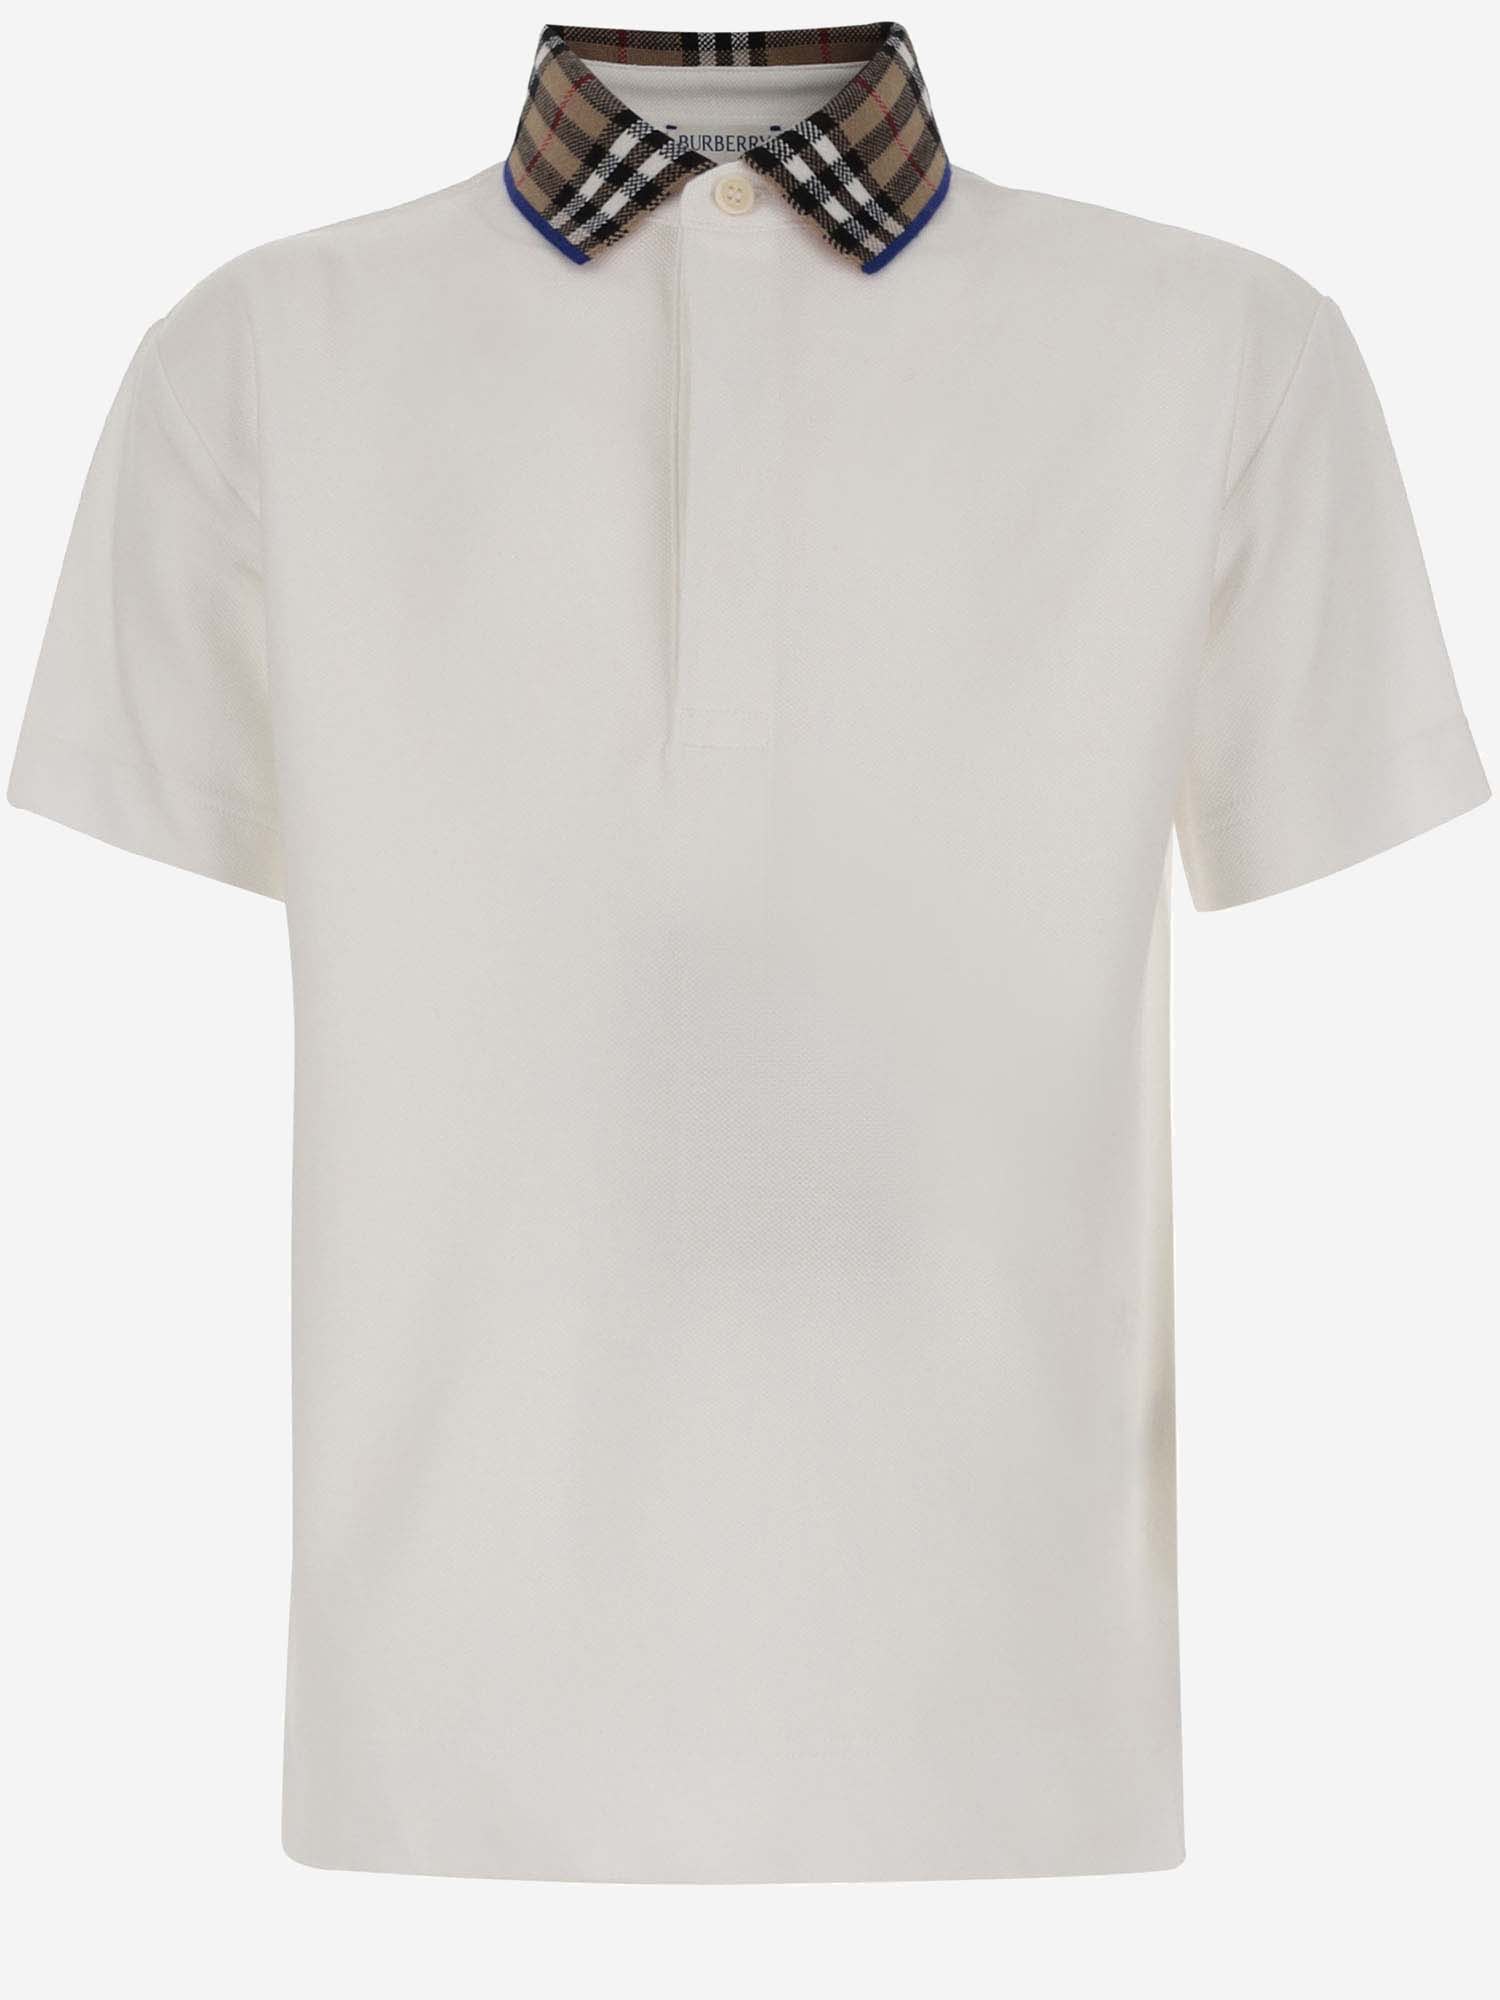 Burberry Cotton Polo Shirt With Check Pattern